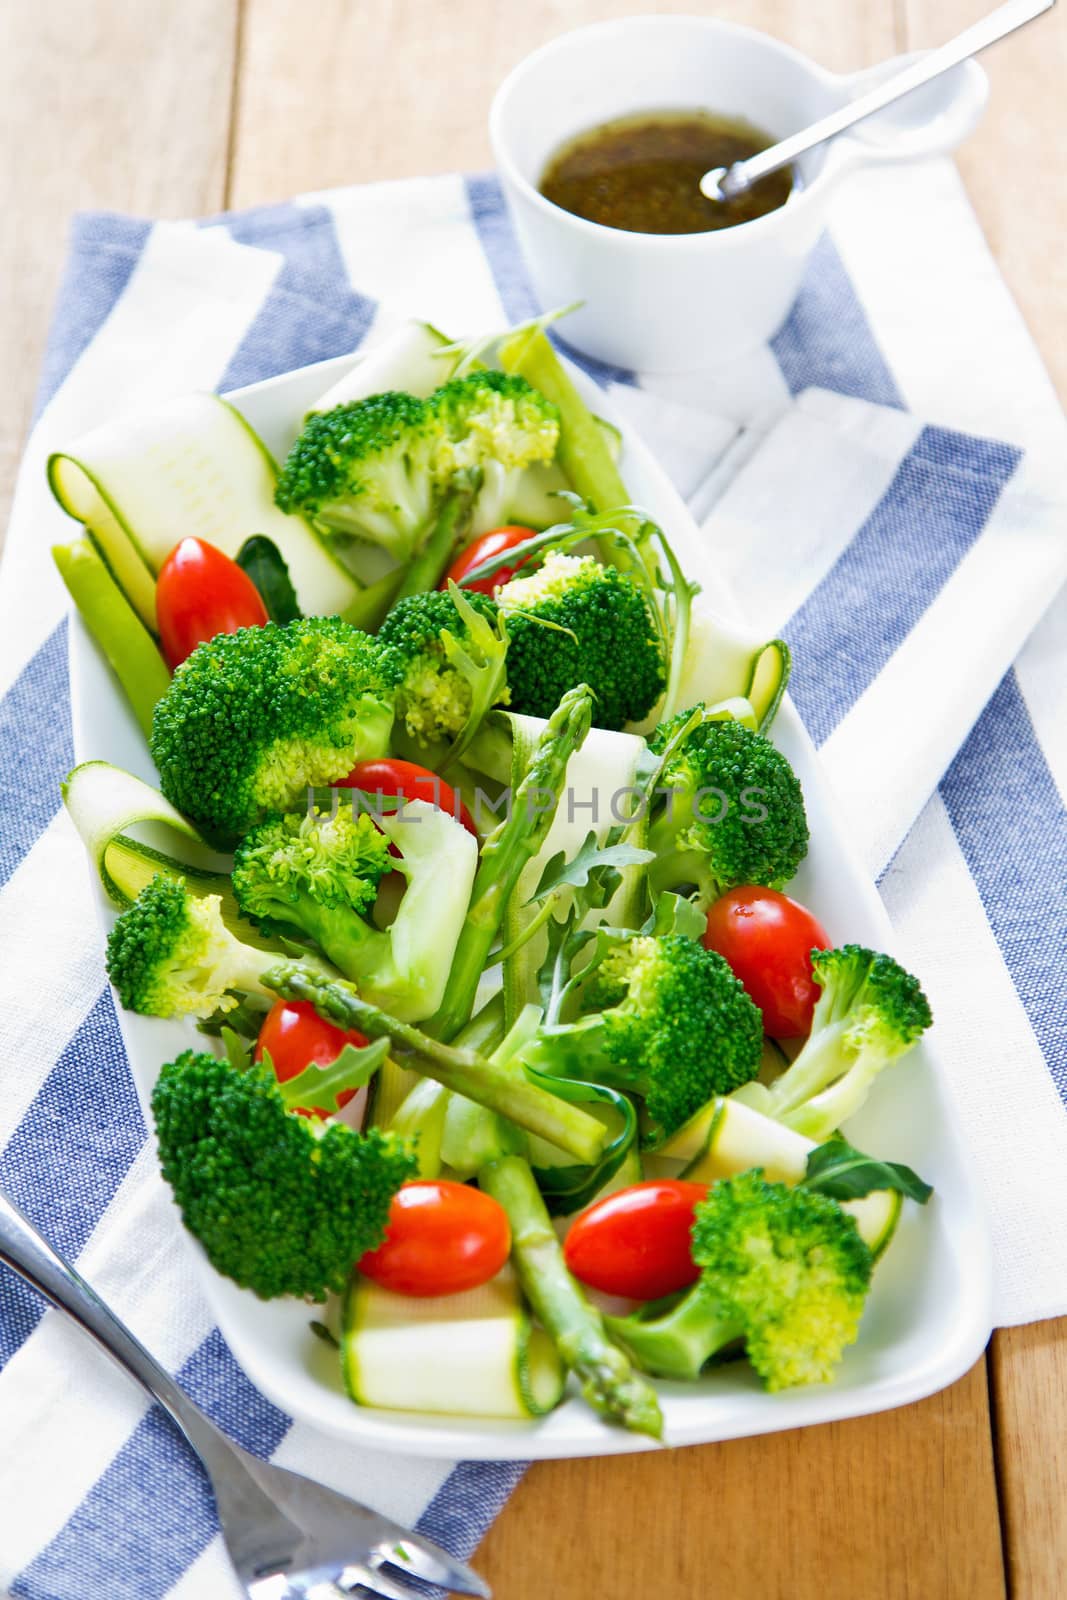 Broccoli with Asparagus and Zucchini salad by vanillaechoes